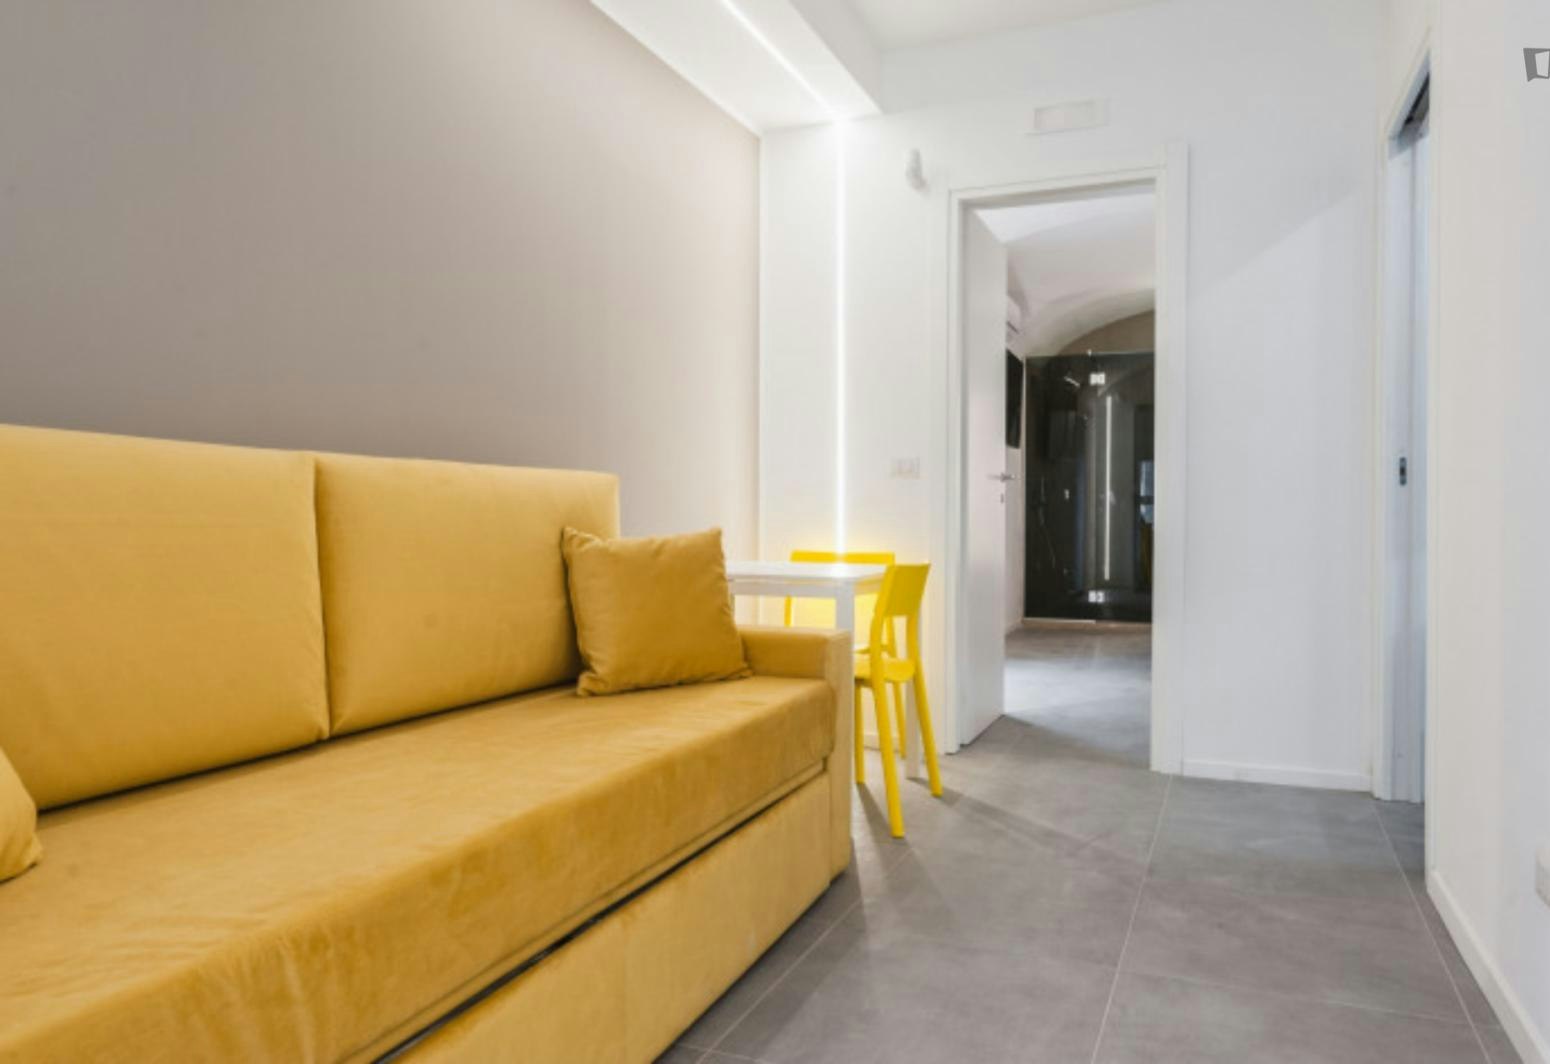 Comfy 1-bedroom flat in the heart of Catania